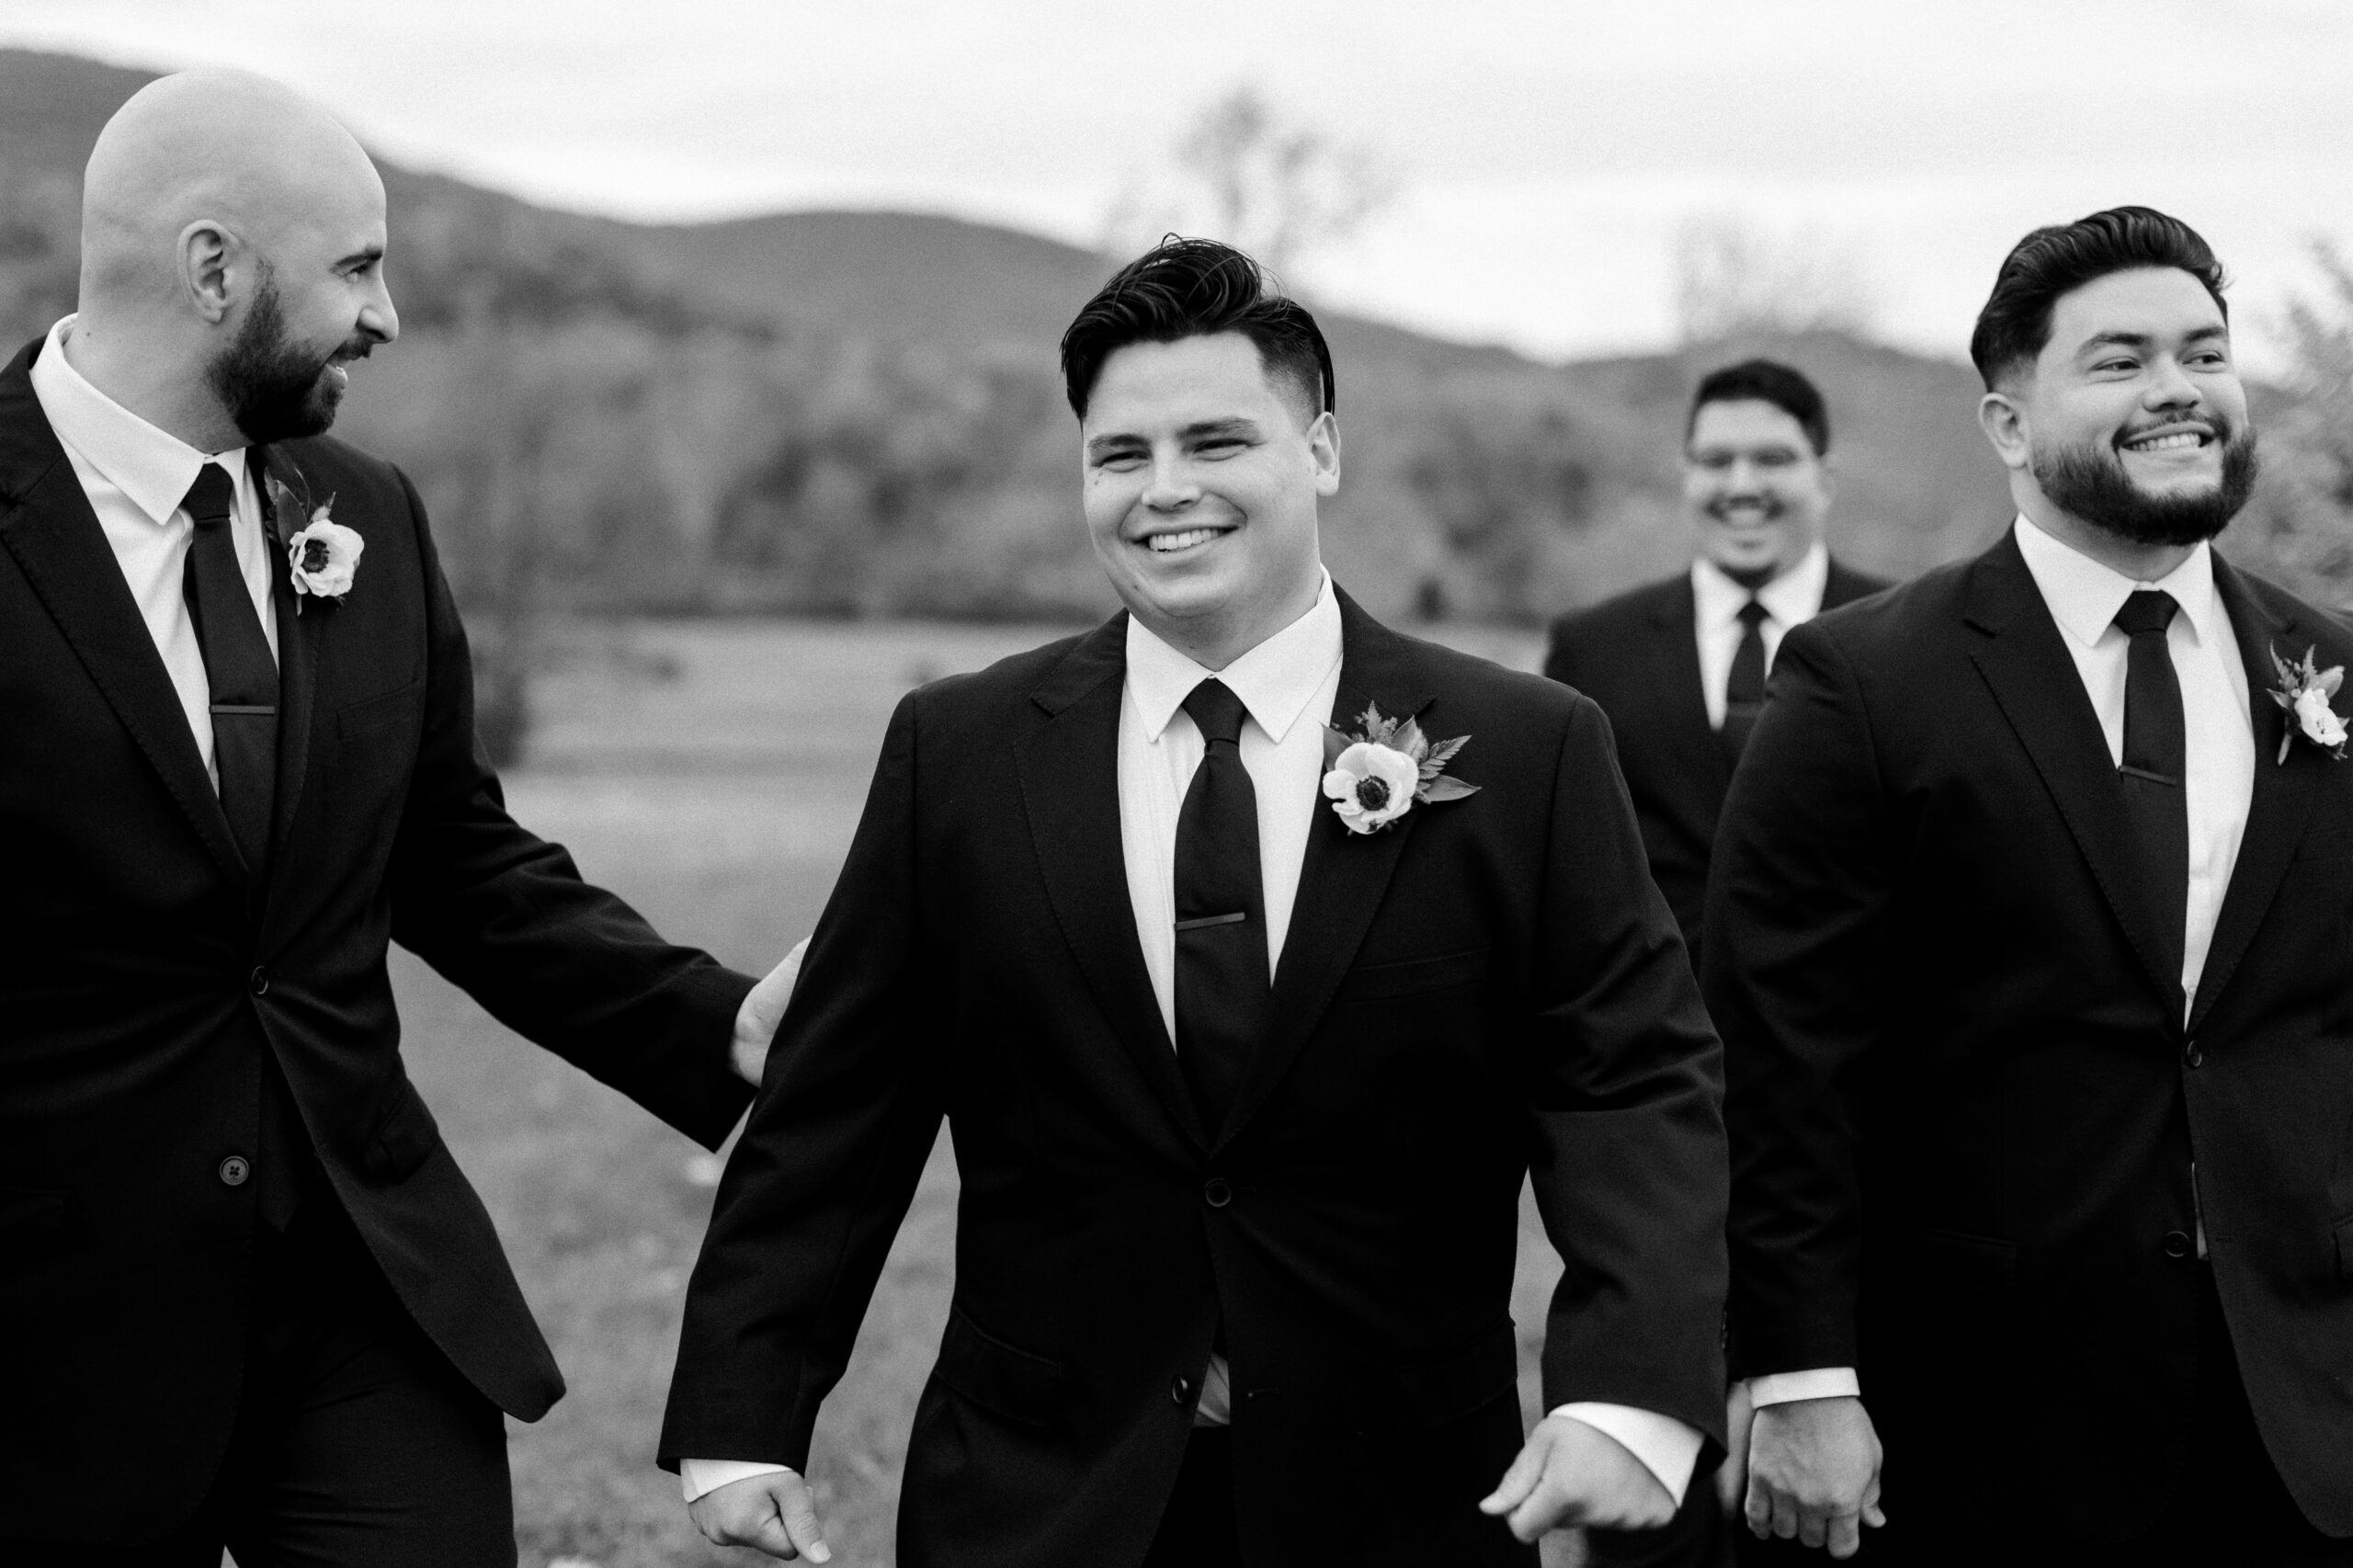 Black and white image of groom walking, smiling, and a couple of his groomsmen are in the background